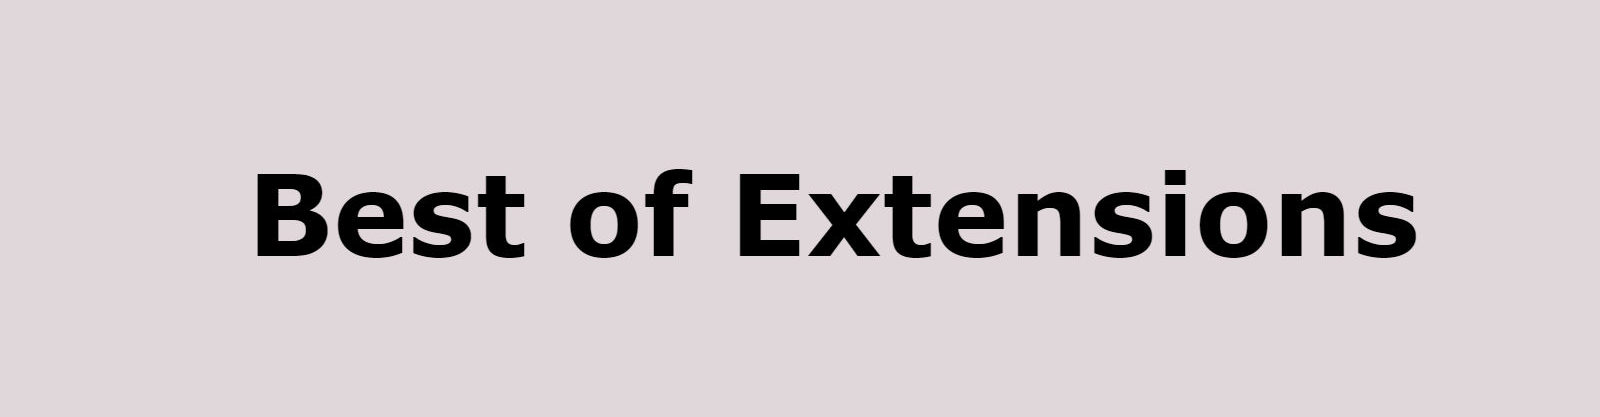 Best of Extensions